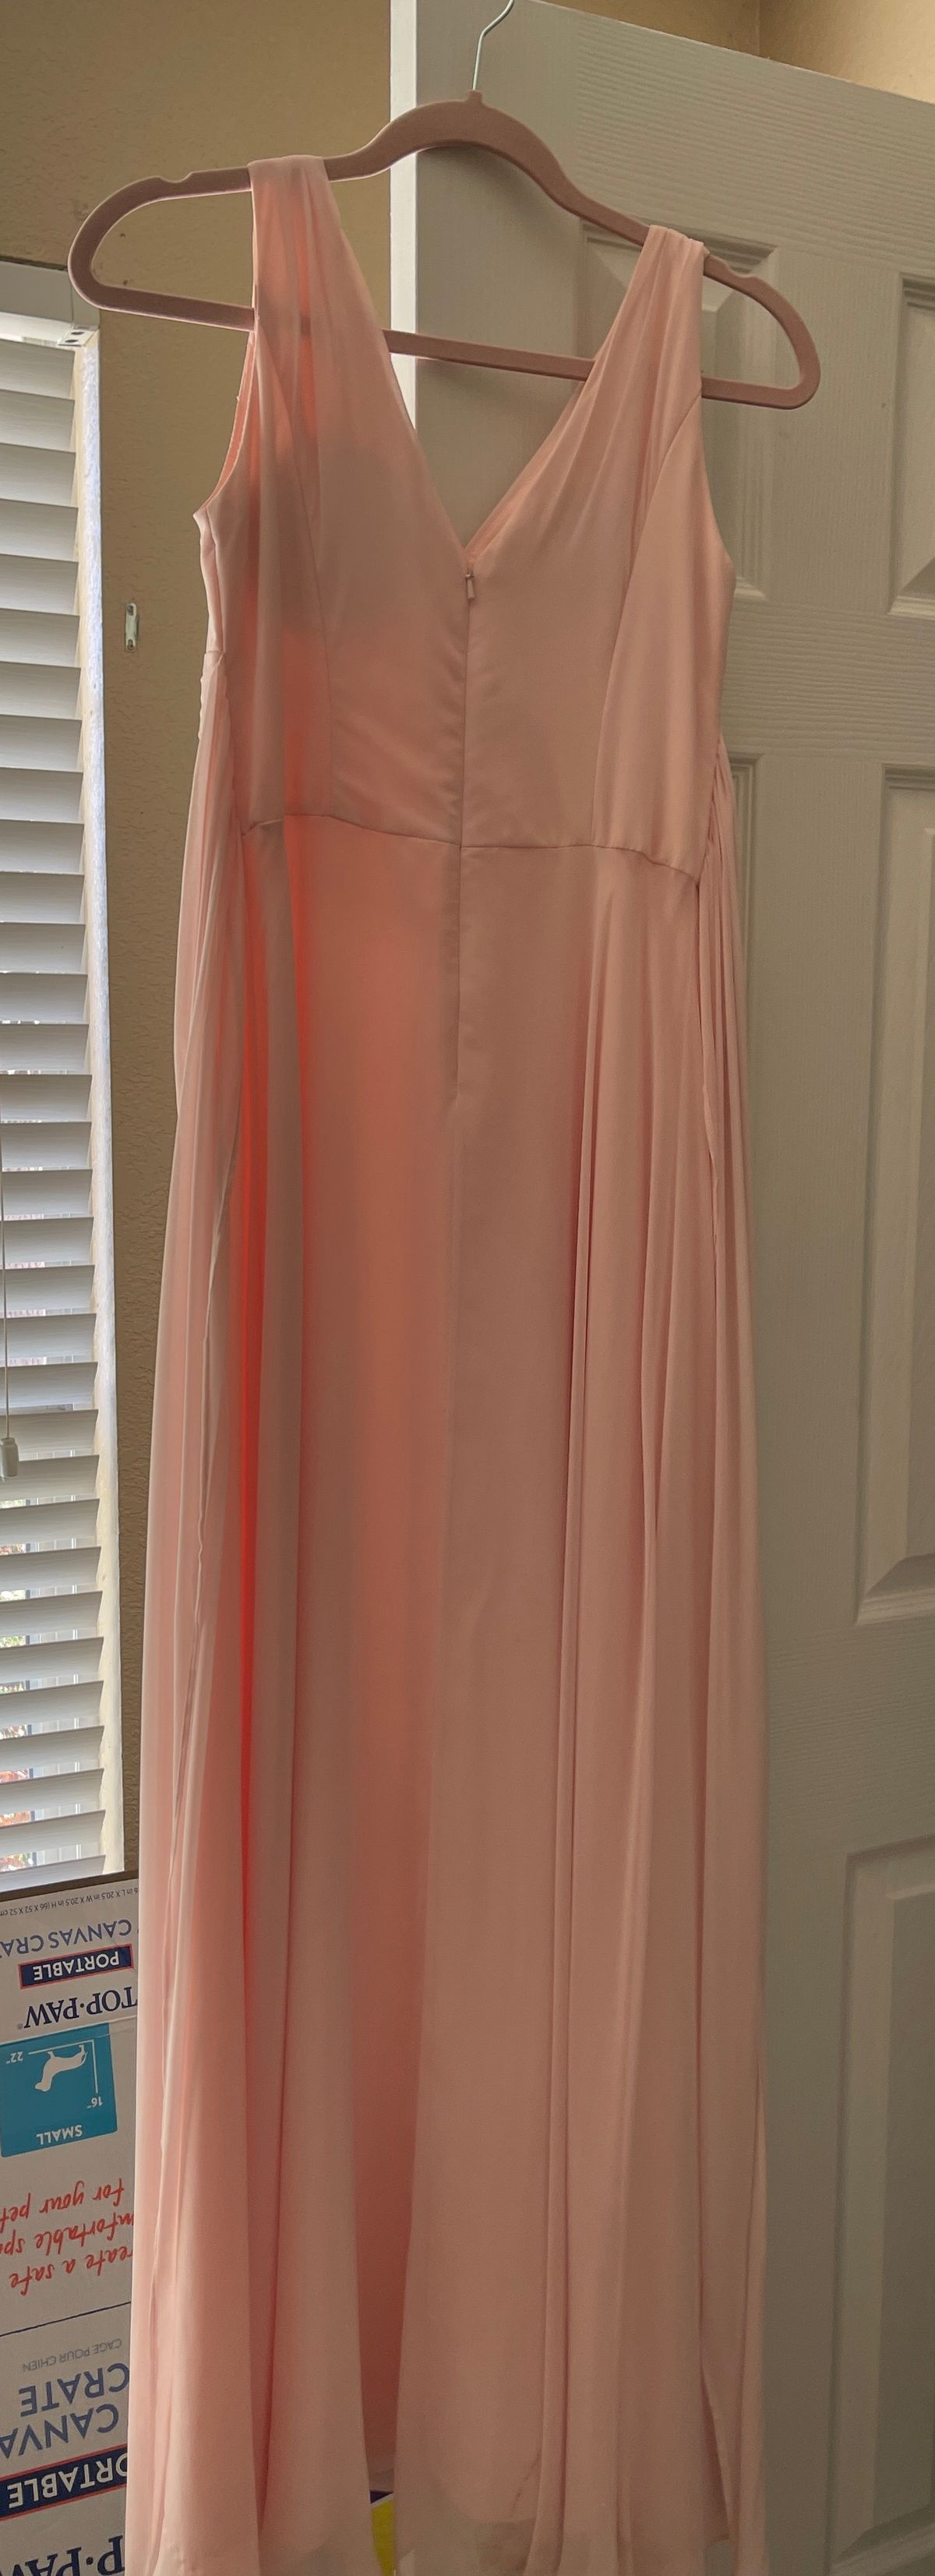 David's Bridal Size 4 Prom Nude Floor Length Maxi on Queenly